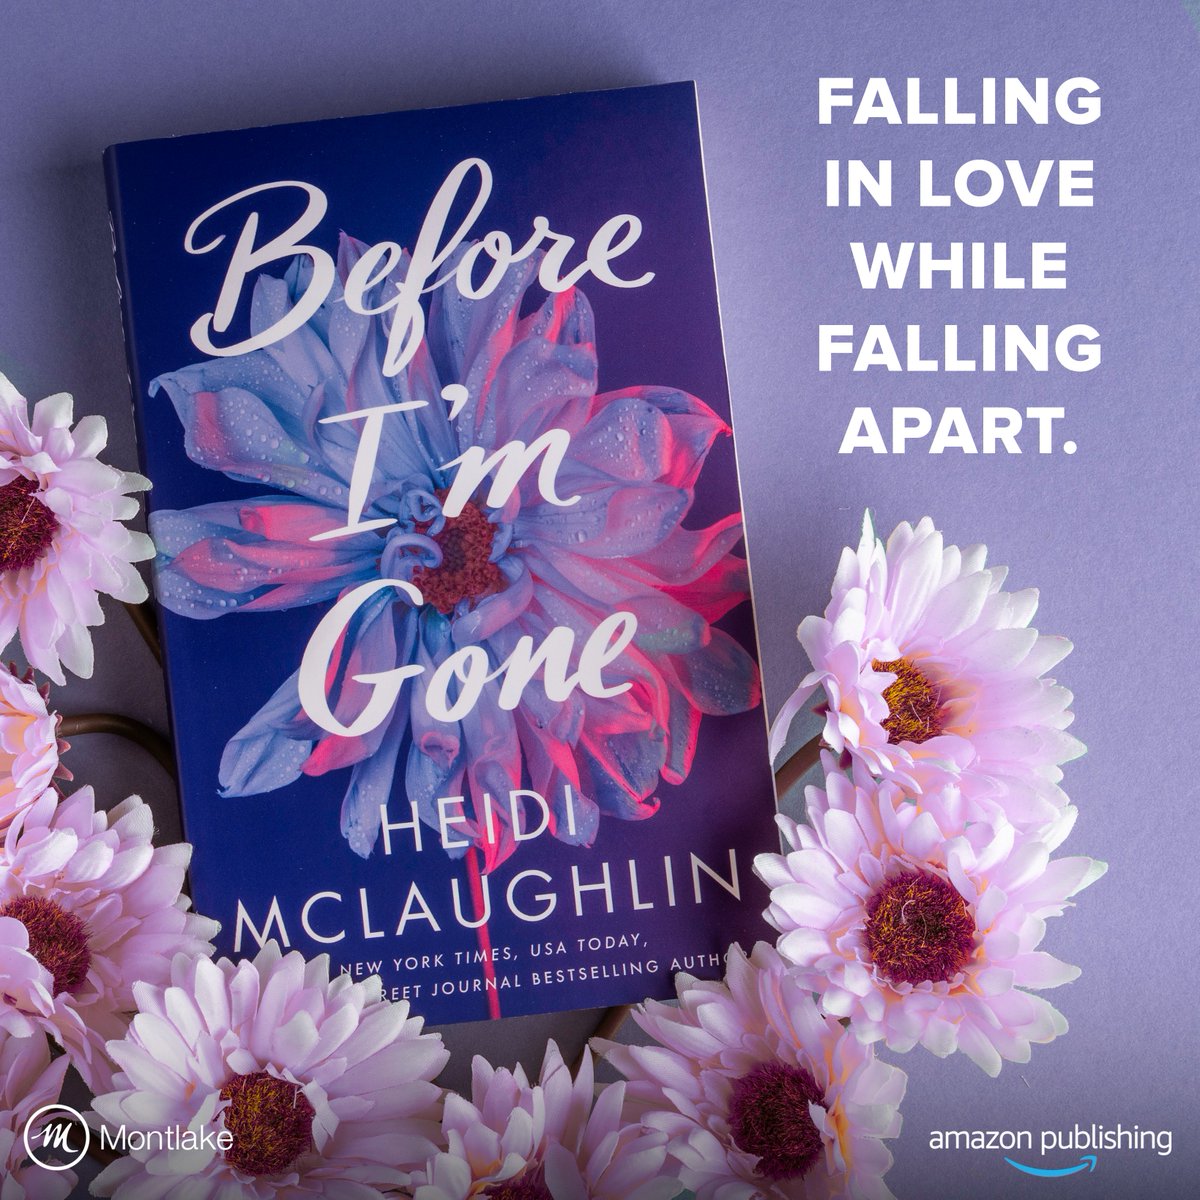 Love knows no limits. Read bestselling author @HeidiJoVT’s moving novel about falling in love while falling apart. Amazon.com/BeforeImGone